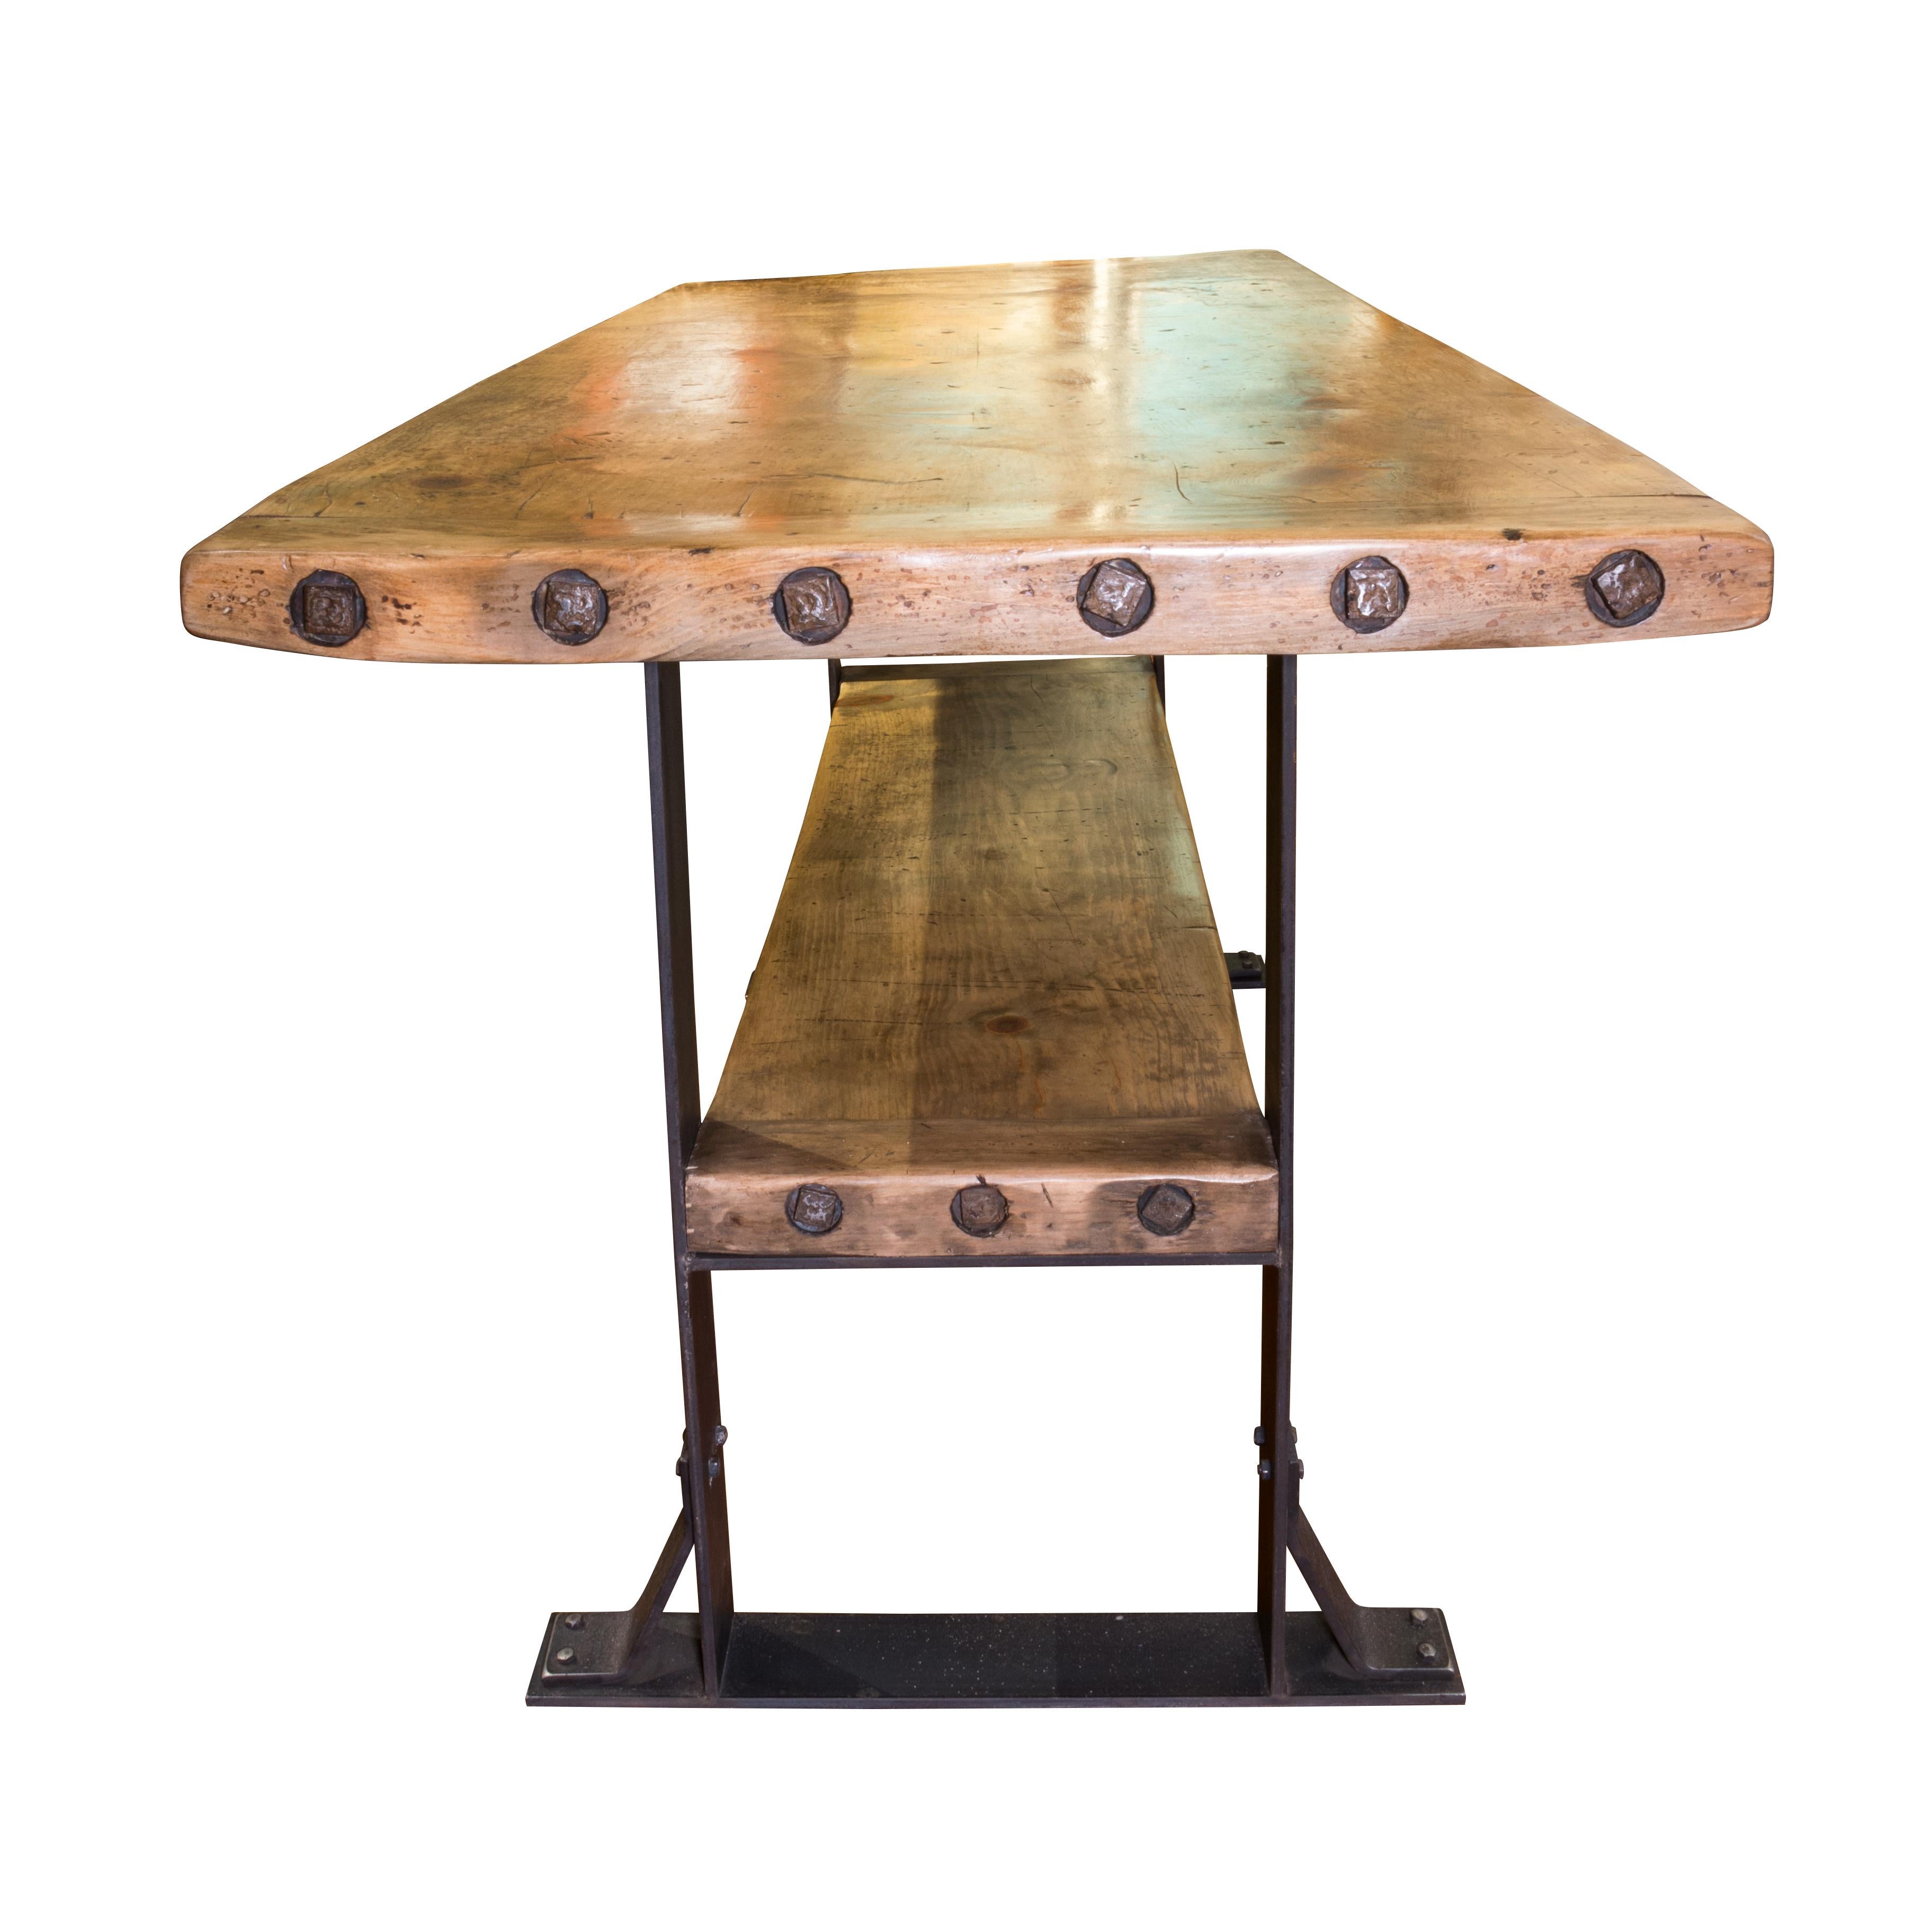 Rustic thick pine workbench table. Iron frame with shelf below. Bar or island height. Excellent craftsmanship. Made to order, can be customizable - you choose your style and dimensions. One in stock.

Period: Contemporary
Origin: Ciscos
Size: 84